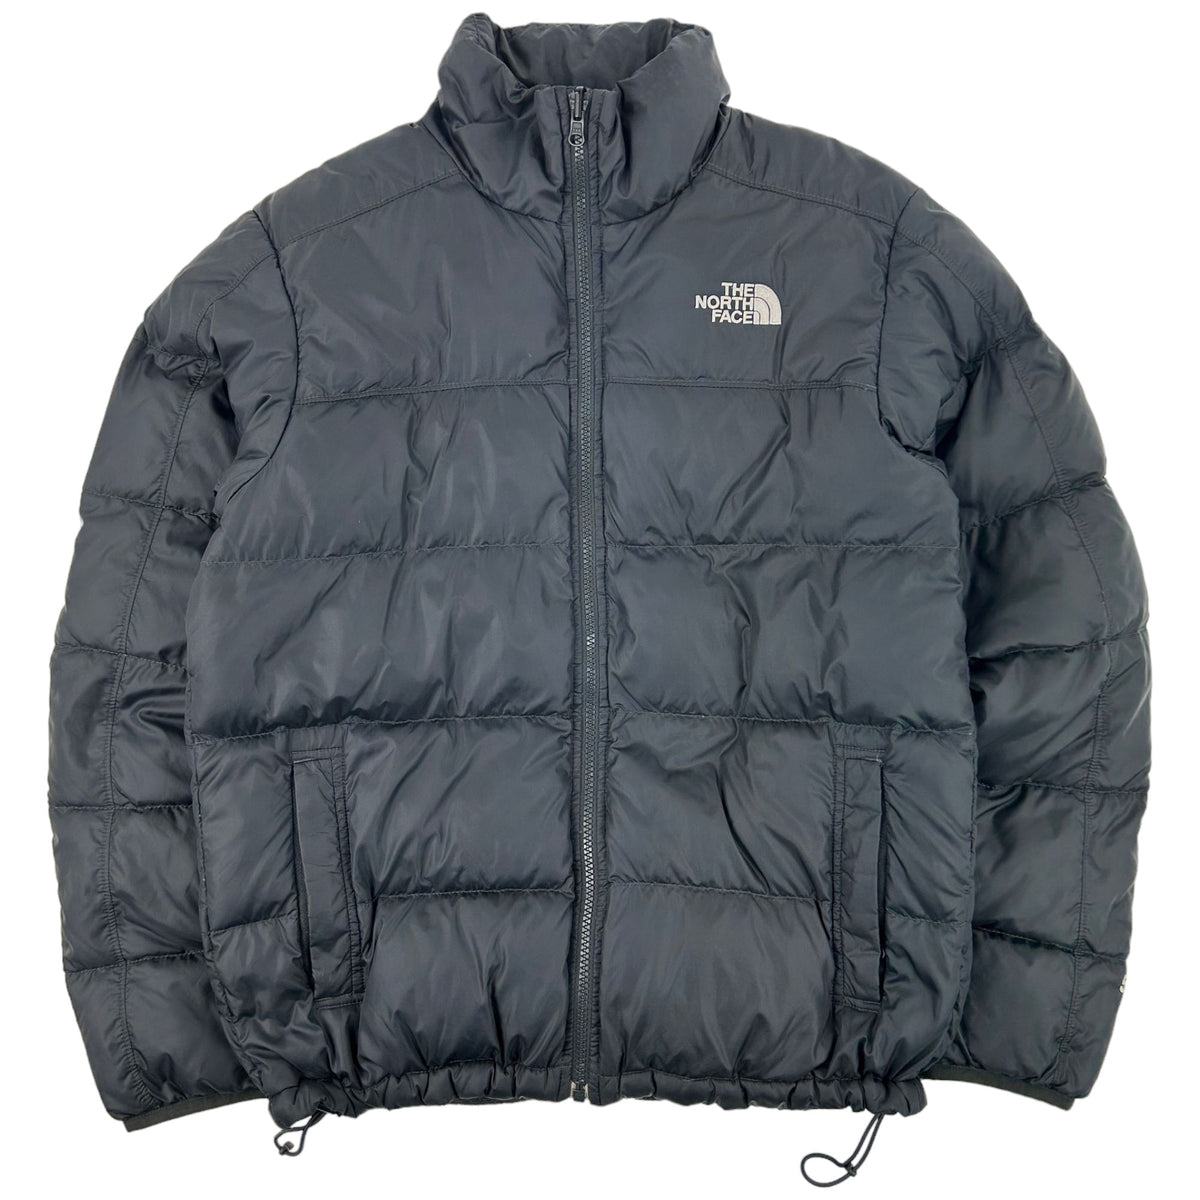 Vintage The North Face Puffer Jacket Size S